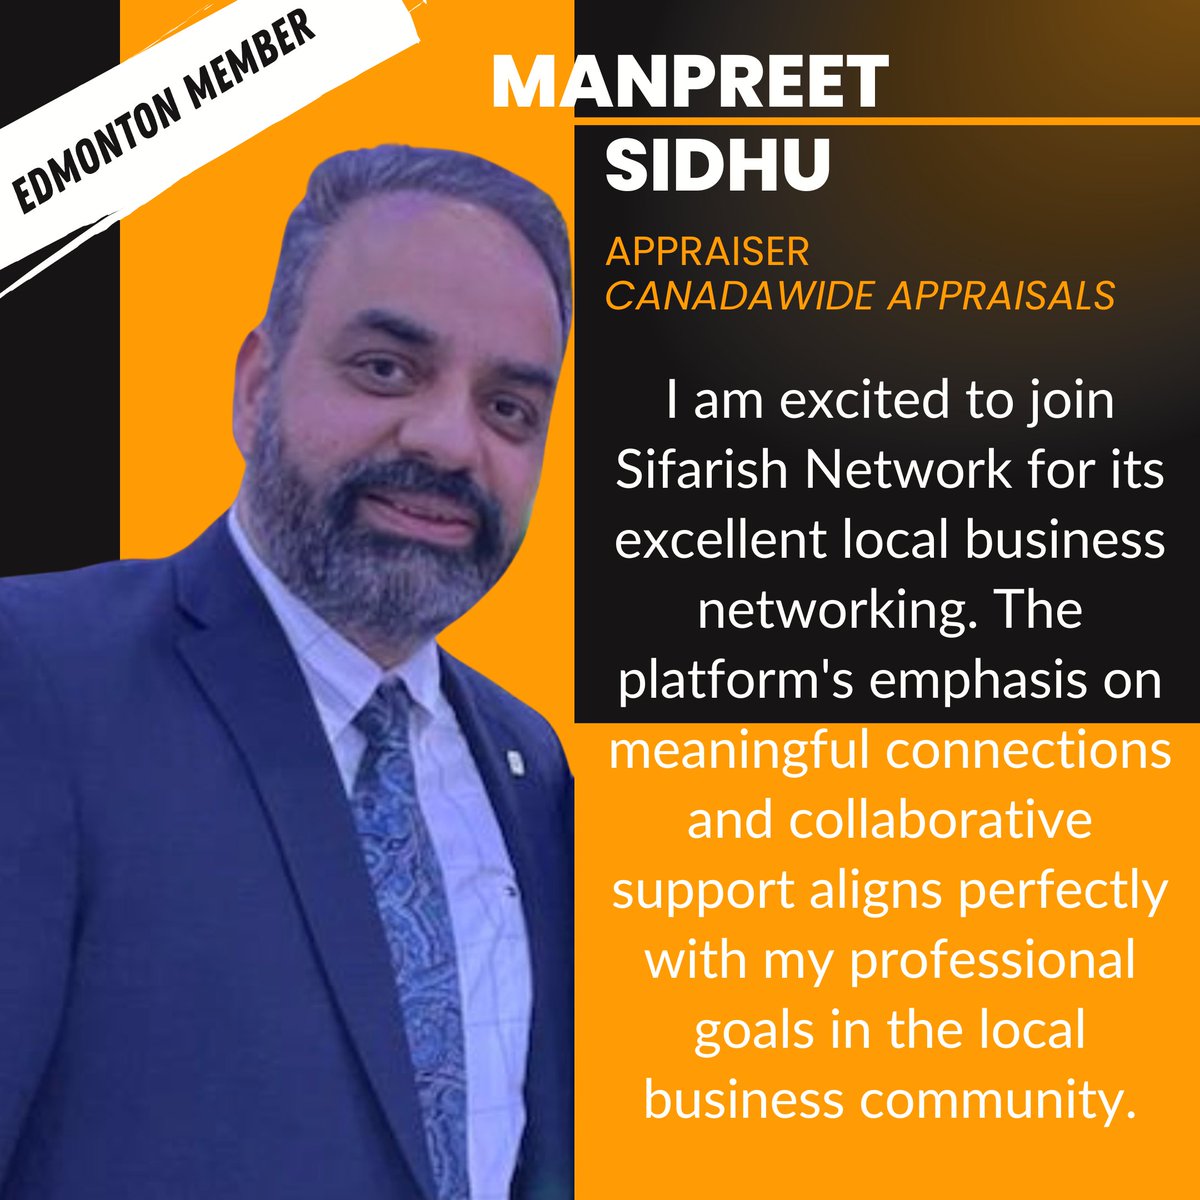 Welcome to this week’s #MembershipMonday! This week, we feature Manpreet Sidhu.
#sifarish #community #connection #collaboration #southasian #business #professiona #realestate #appraisals #expertwitness #propertyappraisal #relocationappraisals #mortgagefinancing #albertarealestate